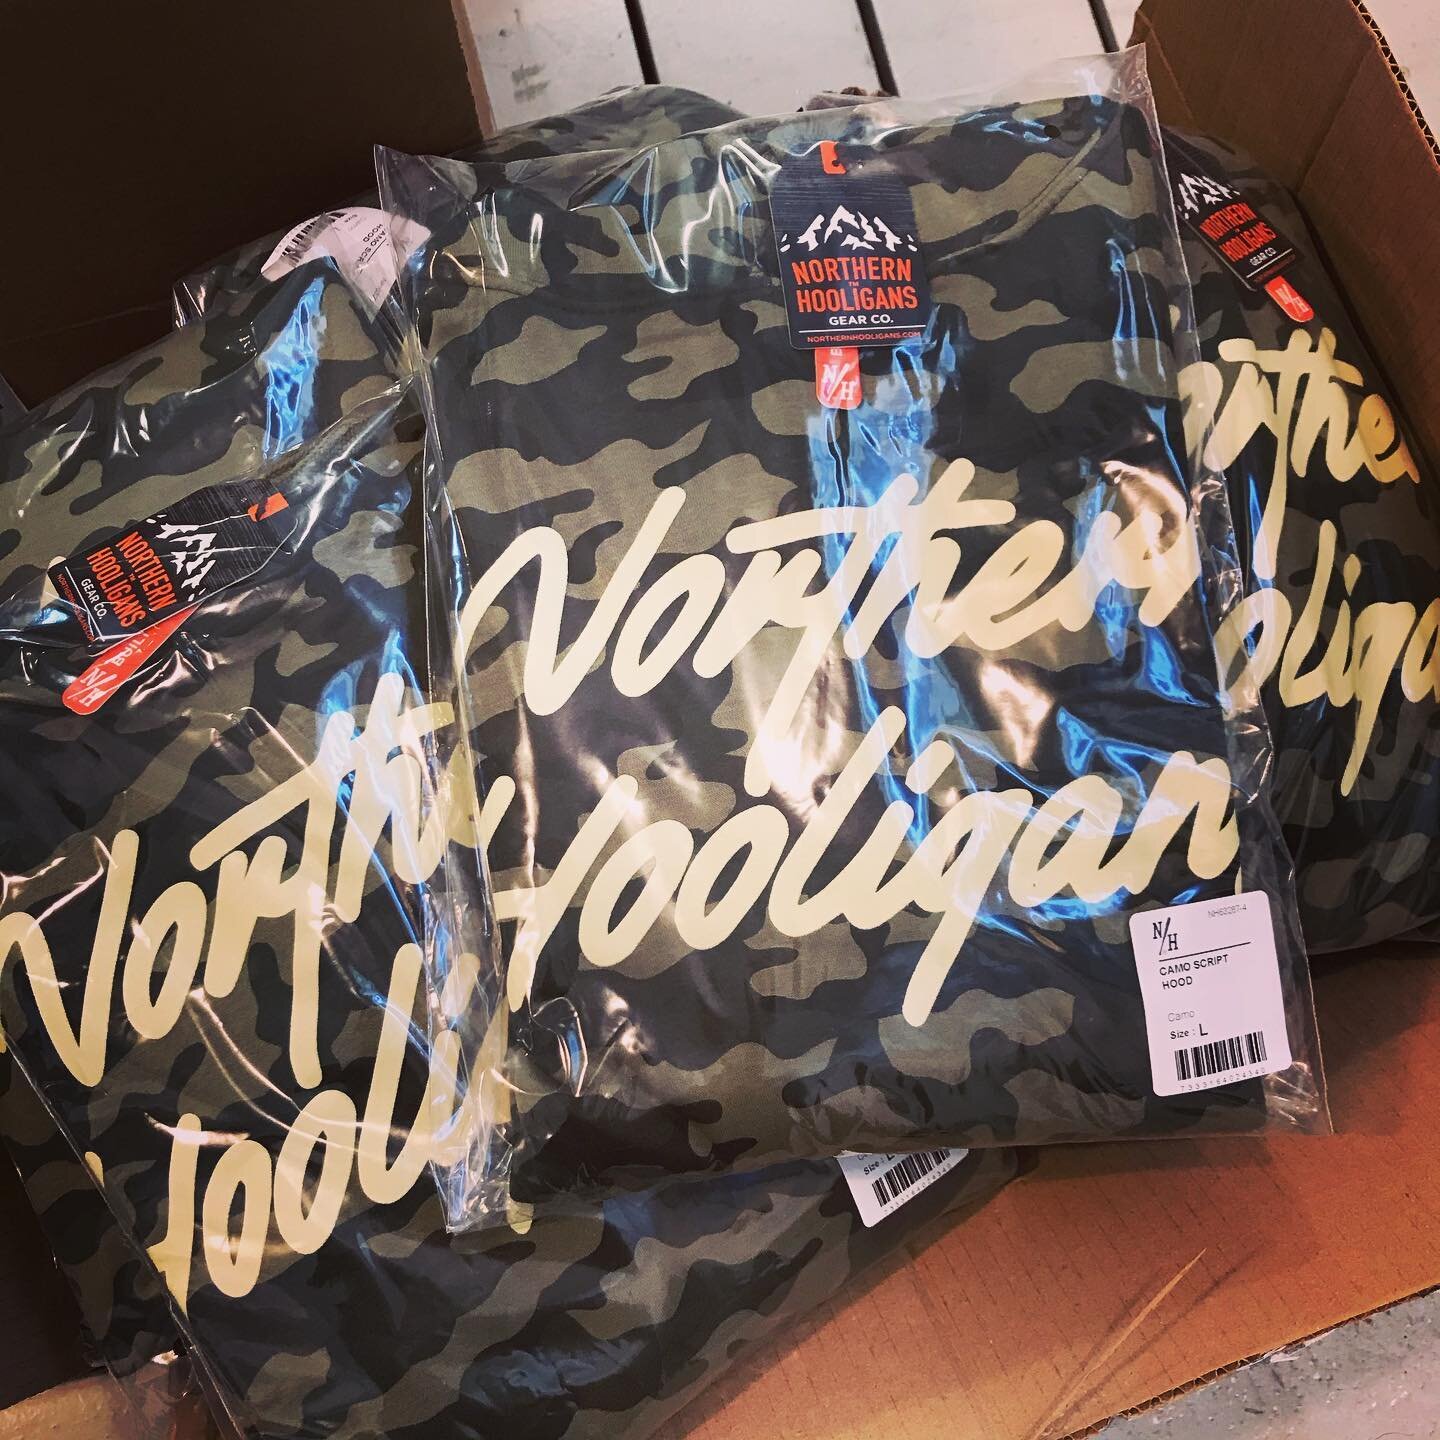 Our SS20 collection is starting to arrive at the warehouse. This is the all new Camo Script Hood. #northernhooligans #streetwearfromthewoods #hoods #scandinavia #ss20